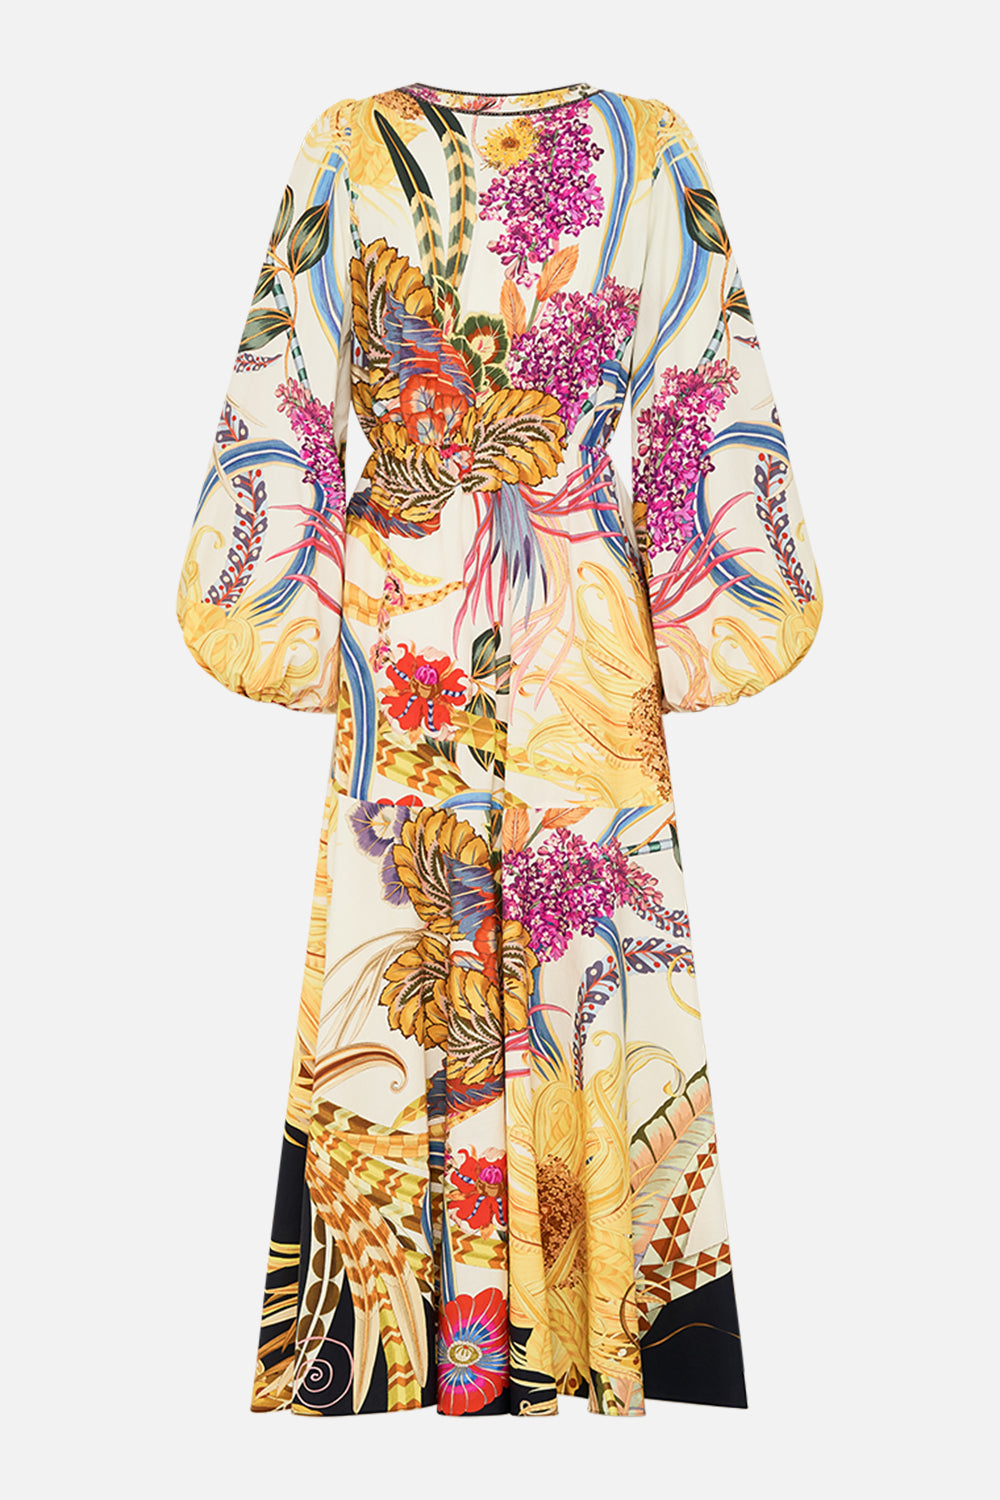 CAMILLA wrap dress in Sunflowers On My Mind print